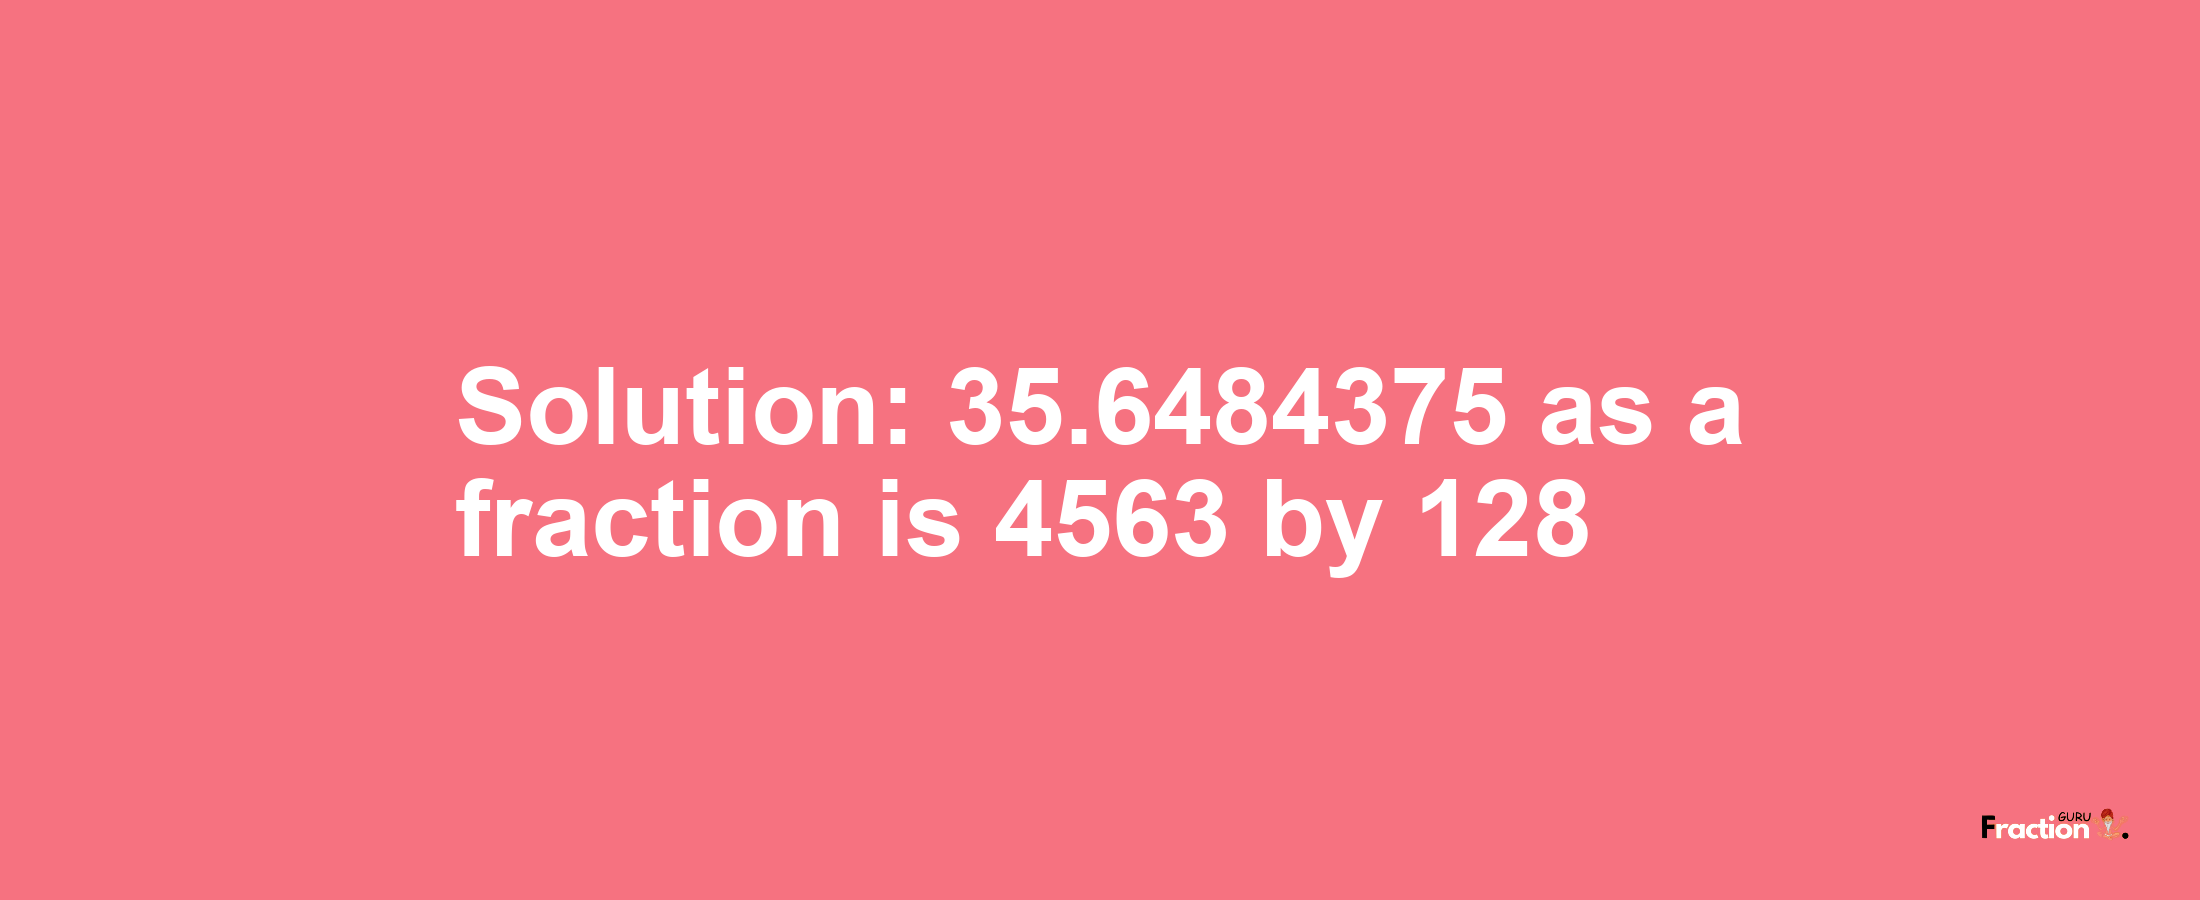 Solution:35.6484375 as a fraction is 4563/128